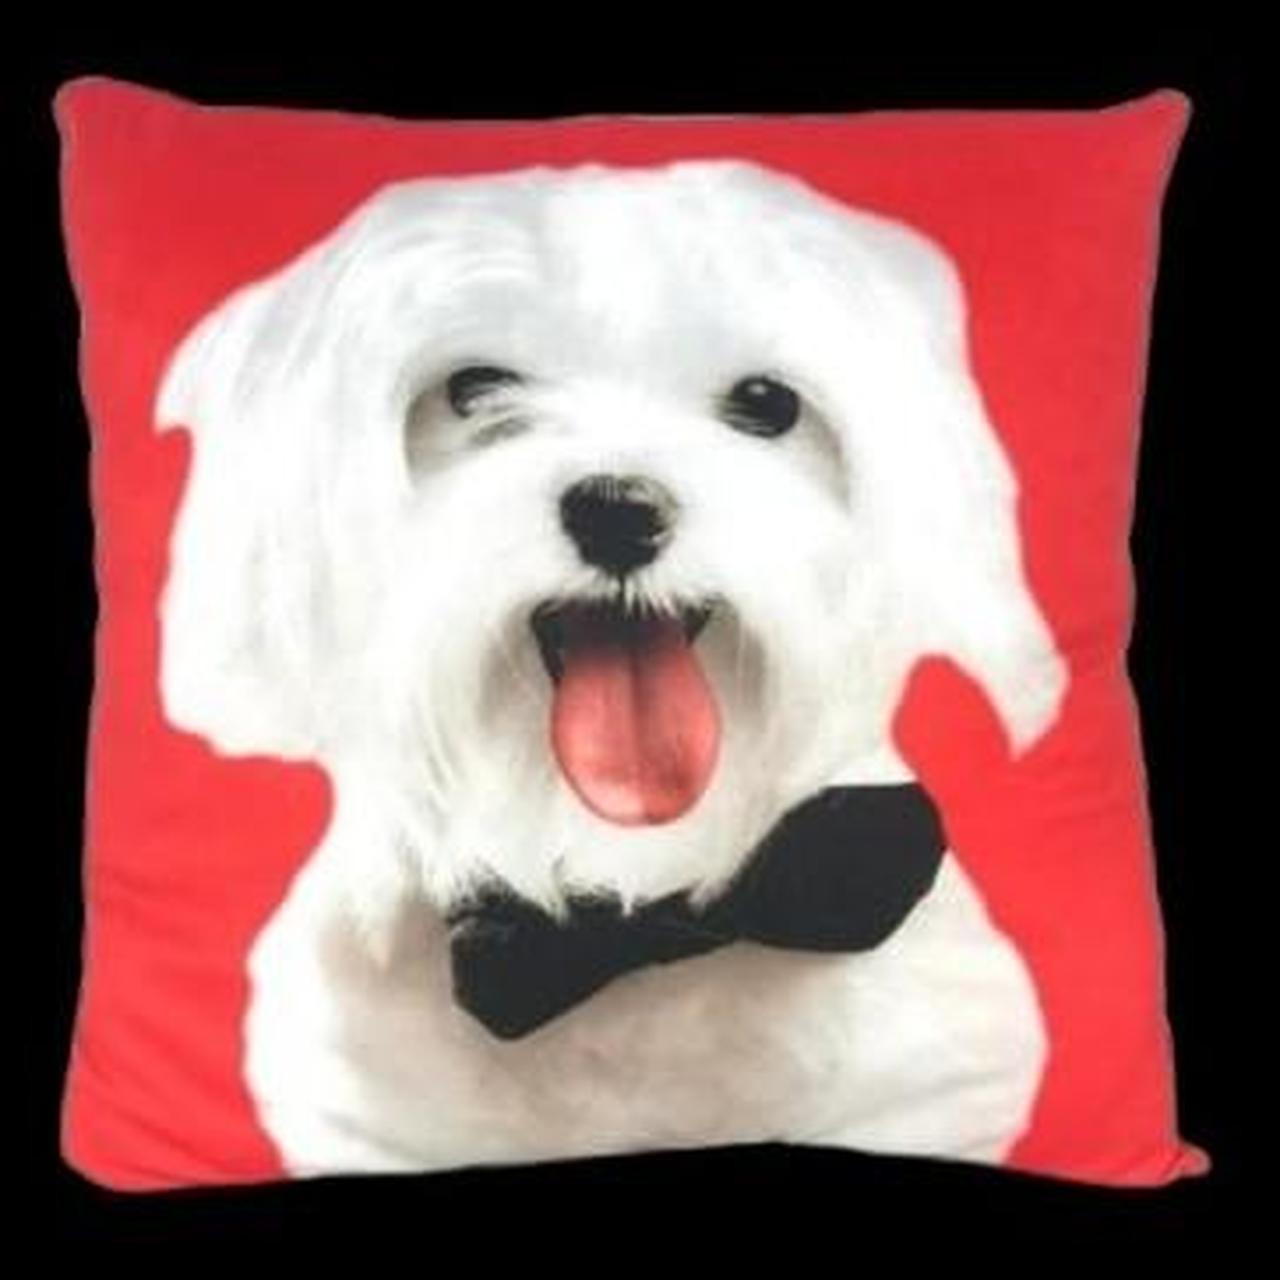 Product Image 1 - NEW DOG PILLOW
Home Bedroom Decor
18x18